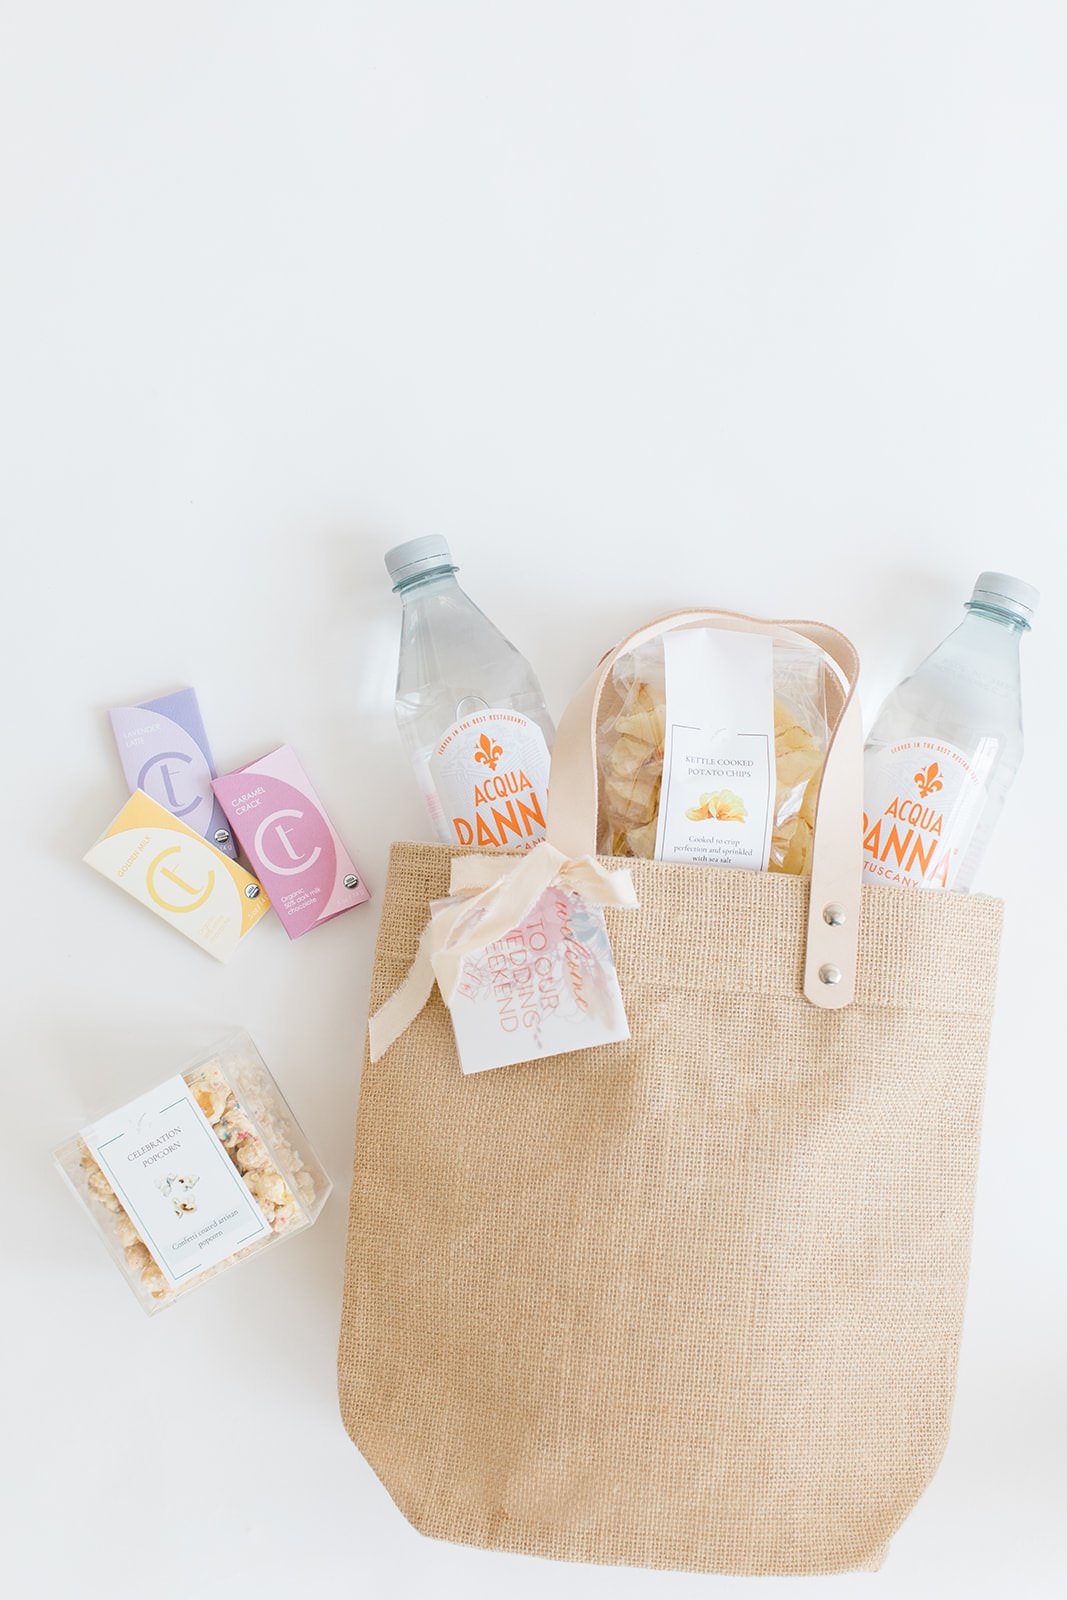 Cute Wedding Welcome Bag Ideas from